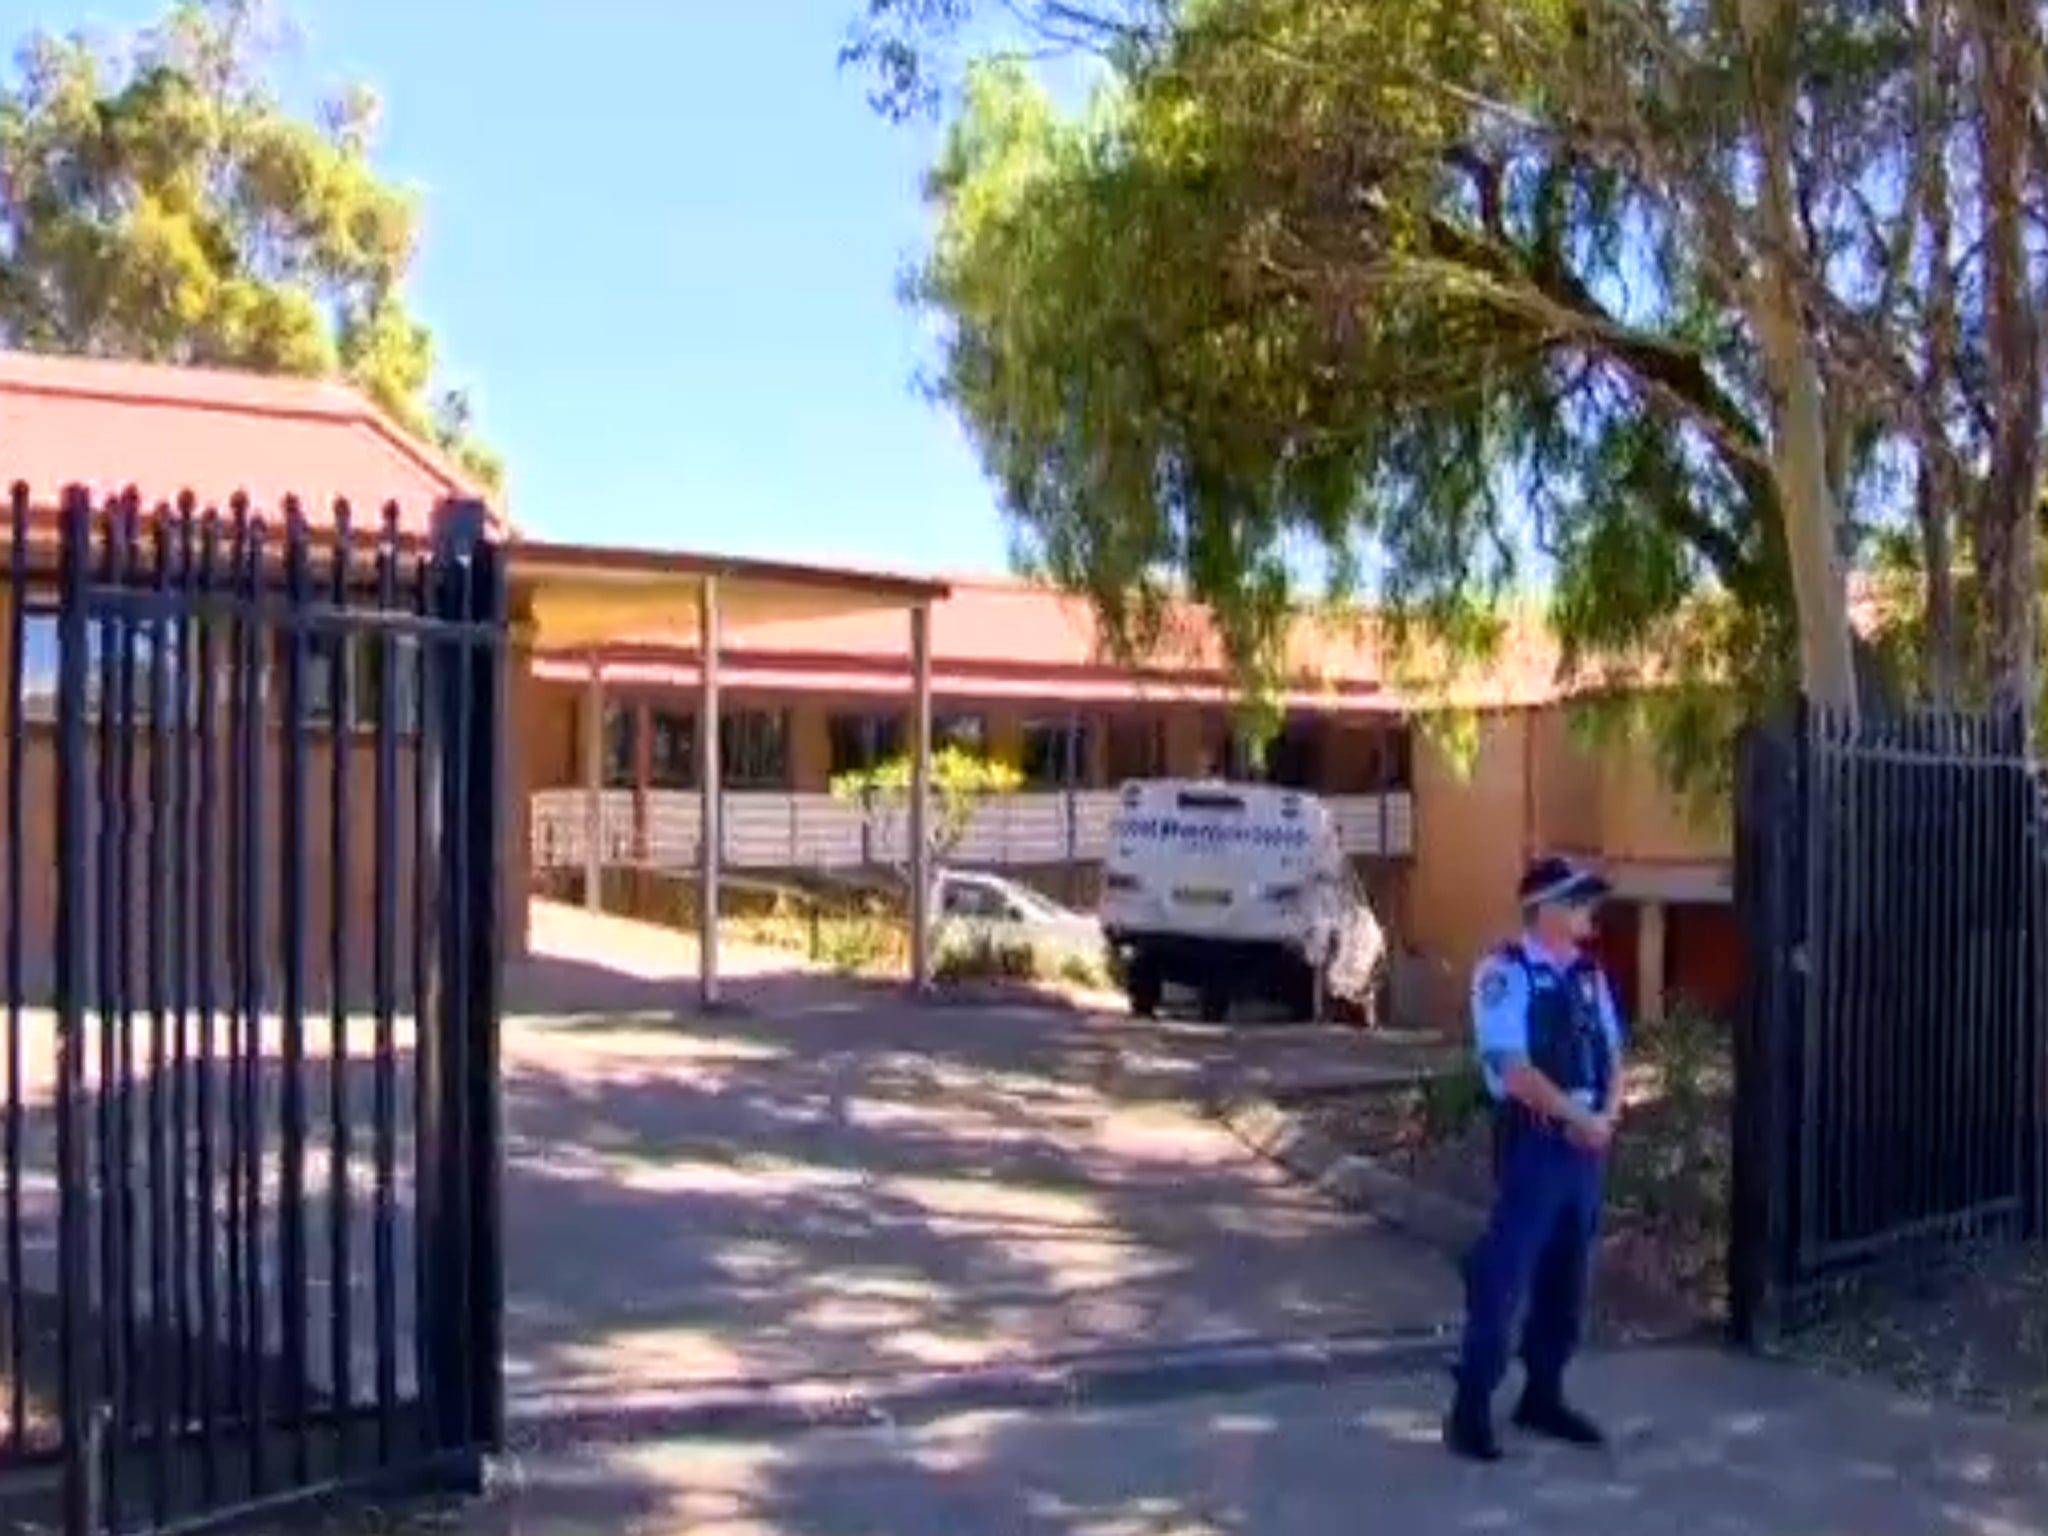 The school in Australia was evacuated after the pupil brought a World War II grenade to class